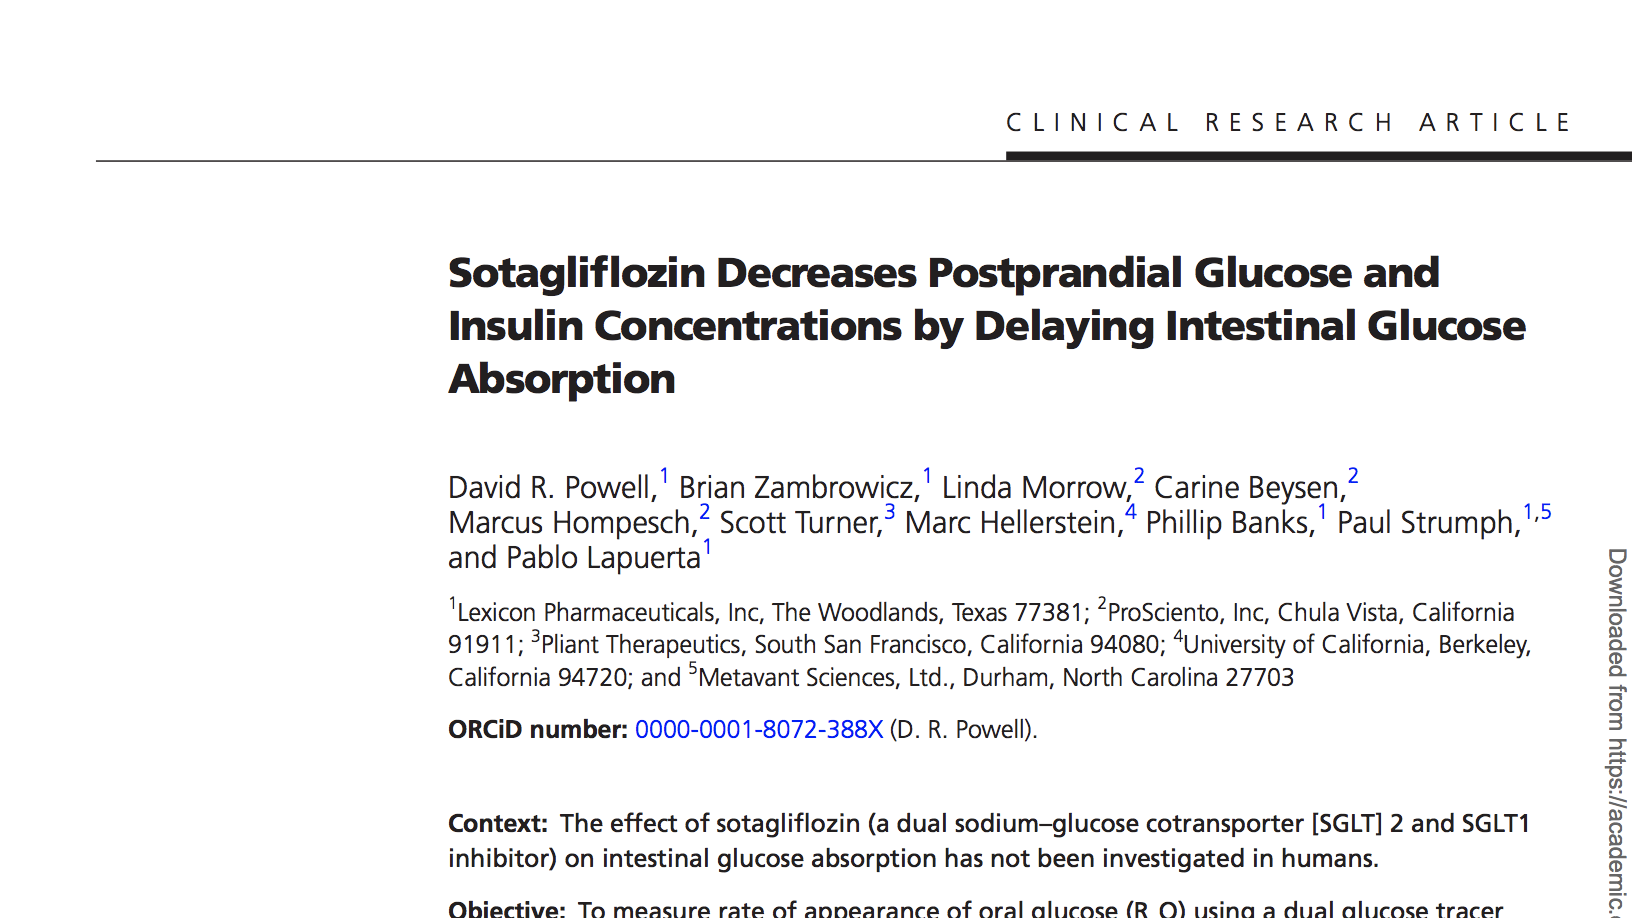 Sotagliflozin Decreases Postprandial Glucose and Insulin Concentrations by Delaying Intestinal Glucose Absorption thumbnail